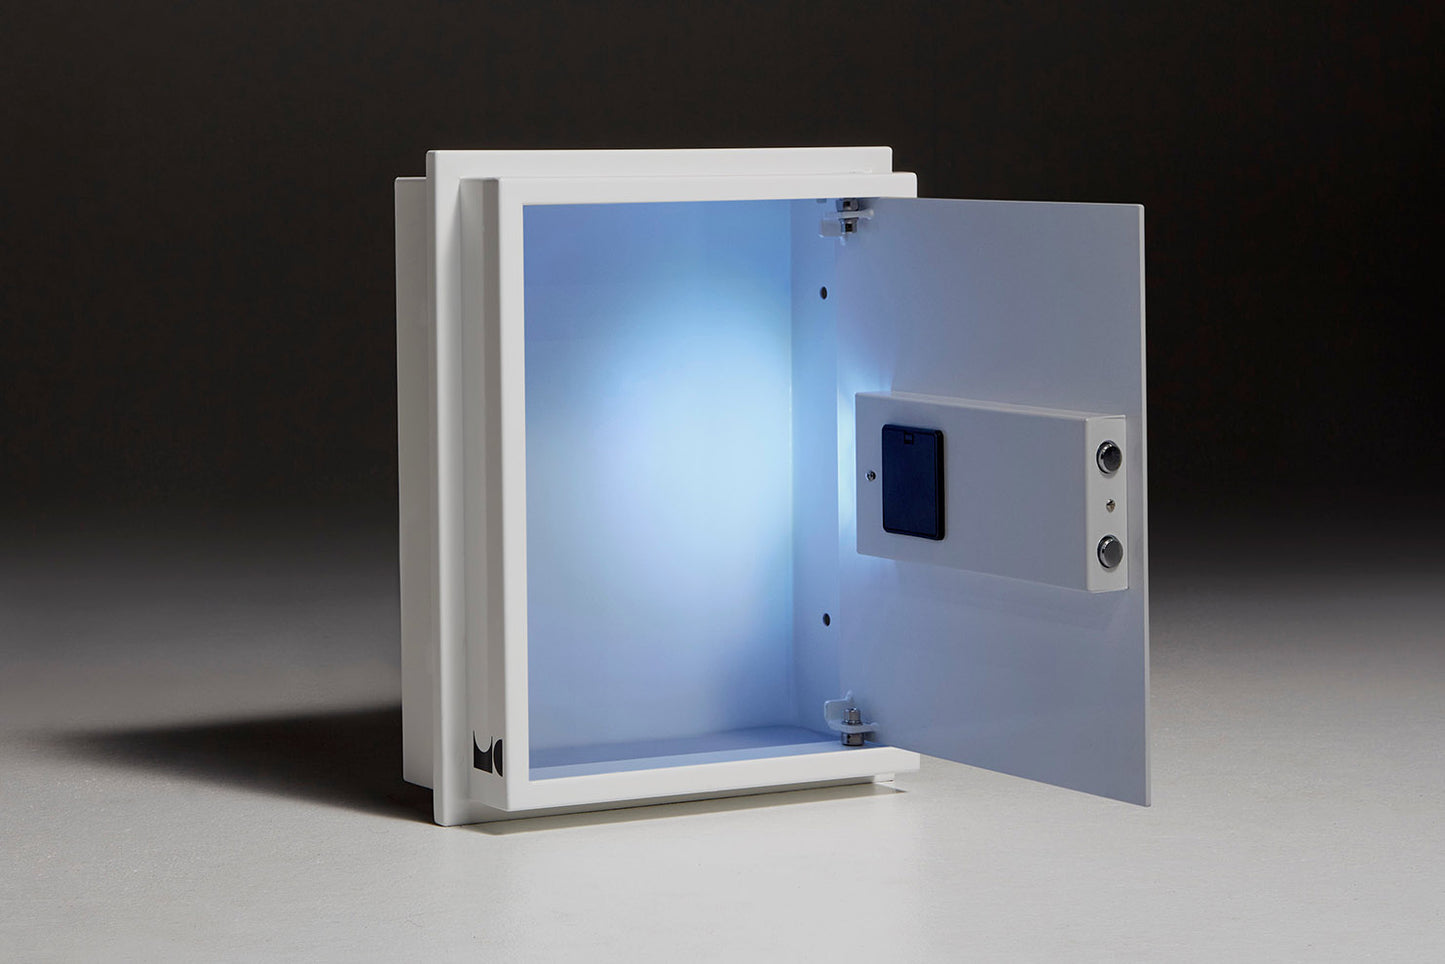 Opened white wall safe sitting in front of black backdrop. Showing interior light